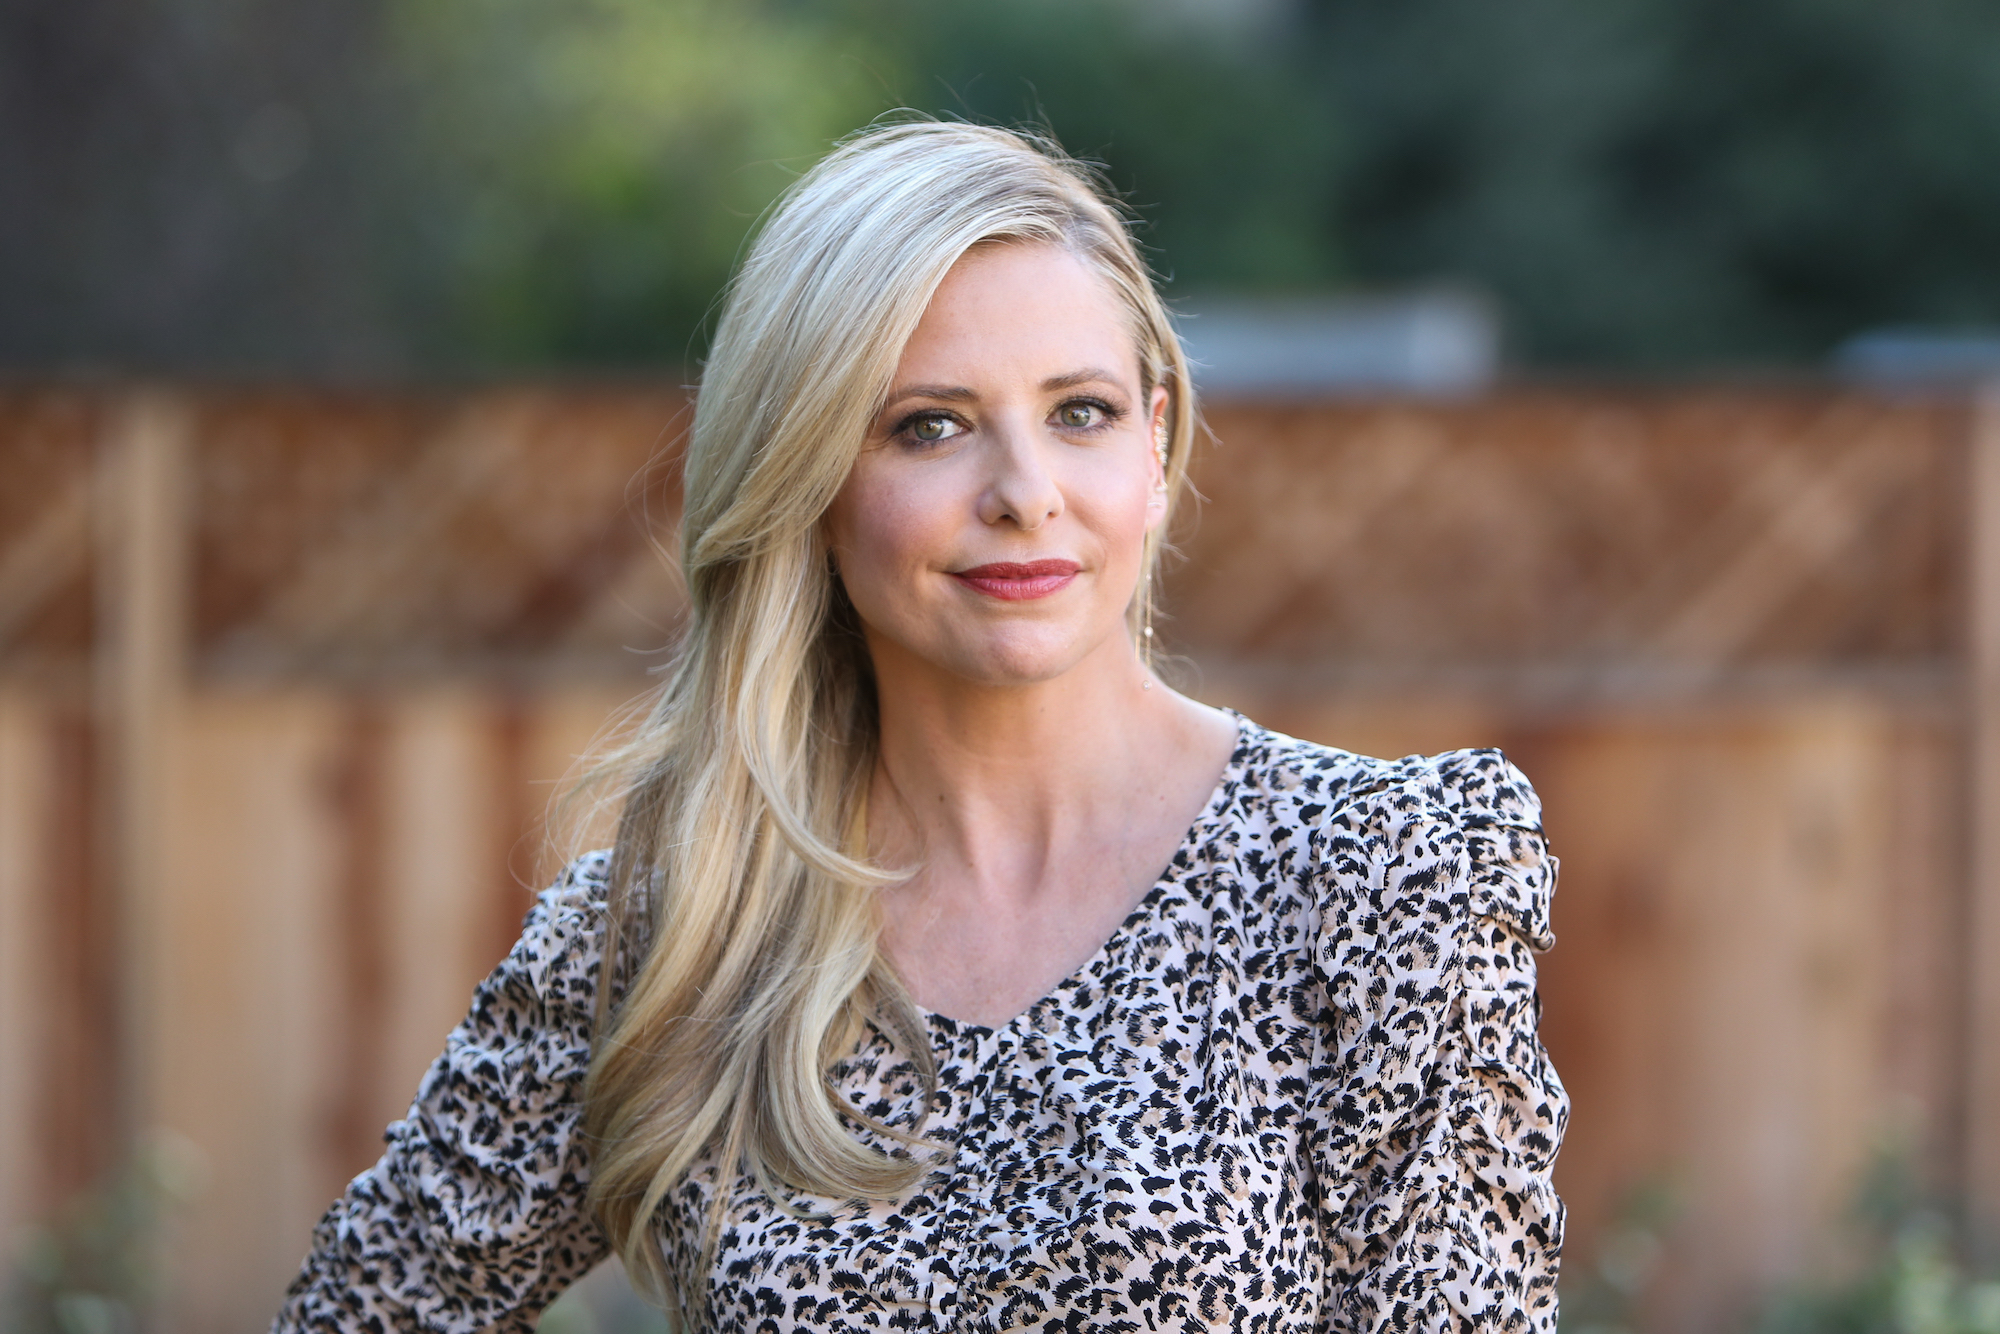 Sarah Michelle Gellar smiling in front of a blurred background